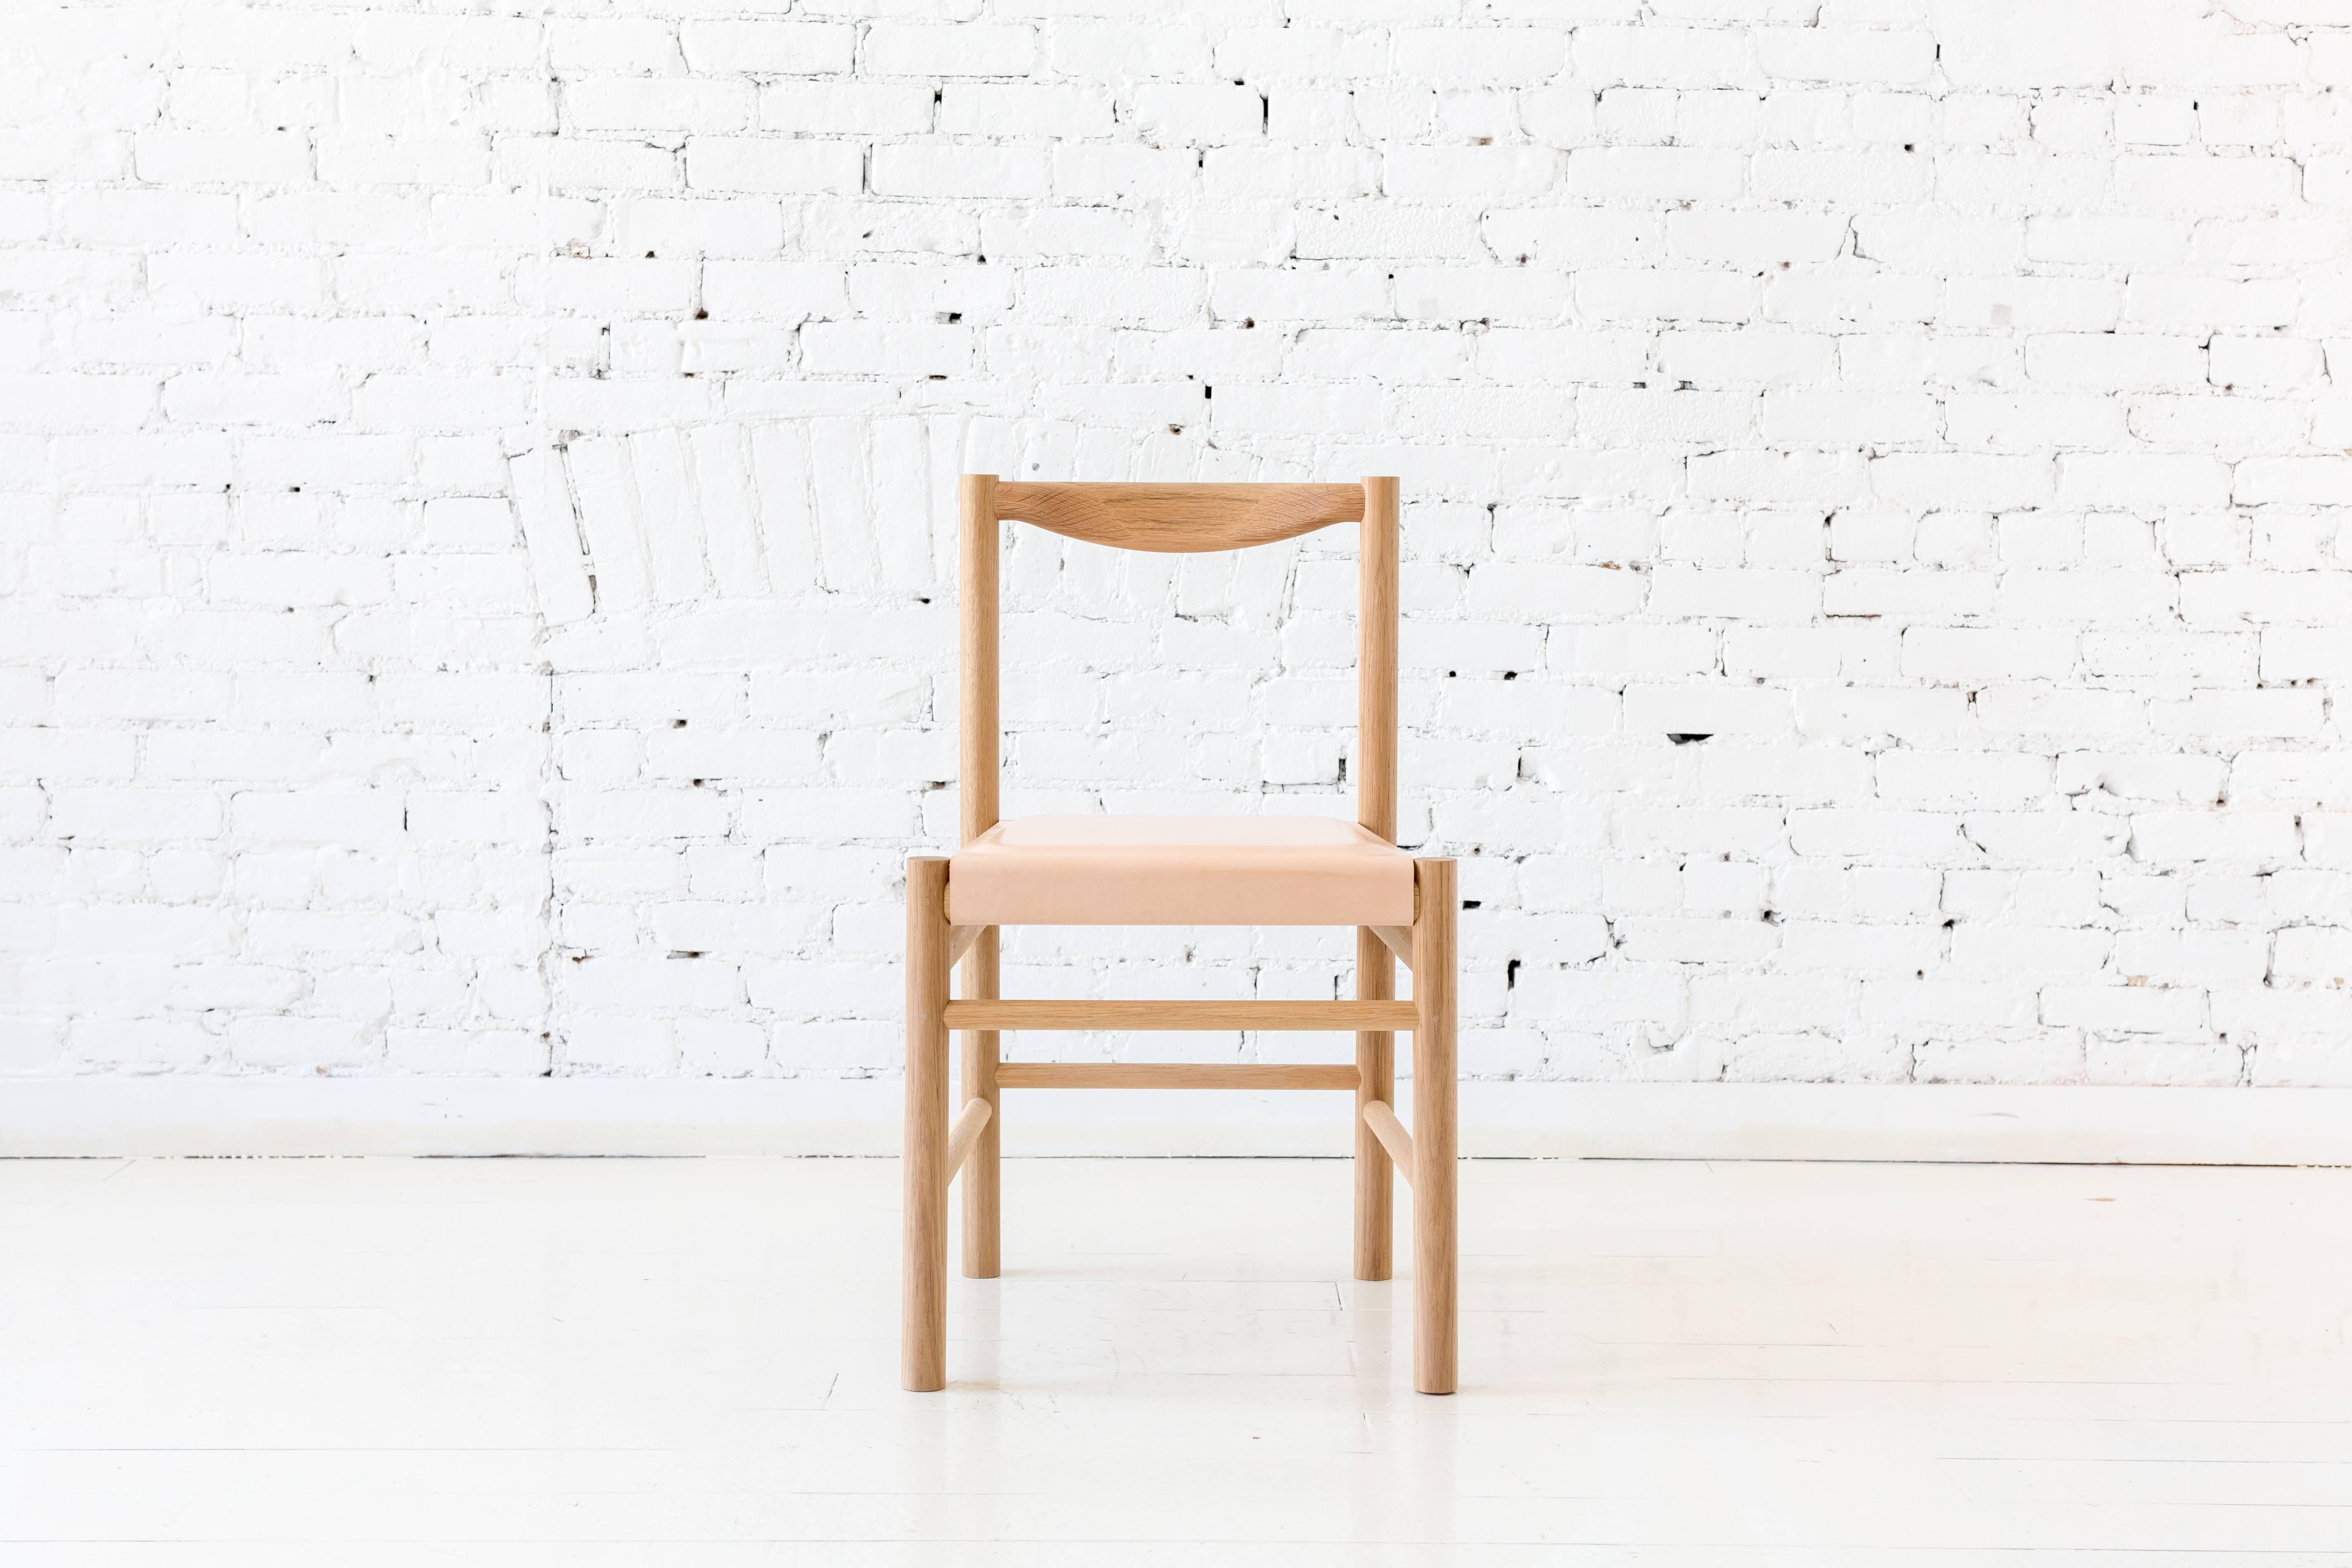 Shaker inspired wood side chair with comfortable contoured back rest. Option for a plain wooden seat pan or a seat pan with a low profile vegetable tanned leather or shearling pad. This chair's simplicity makes it versatile to work well in many